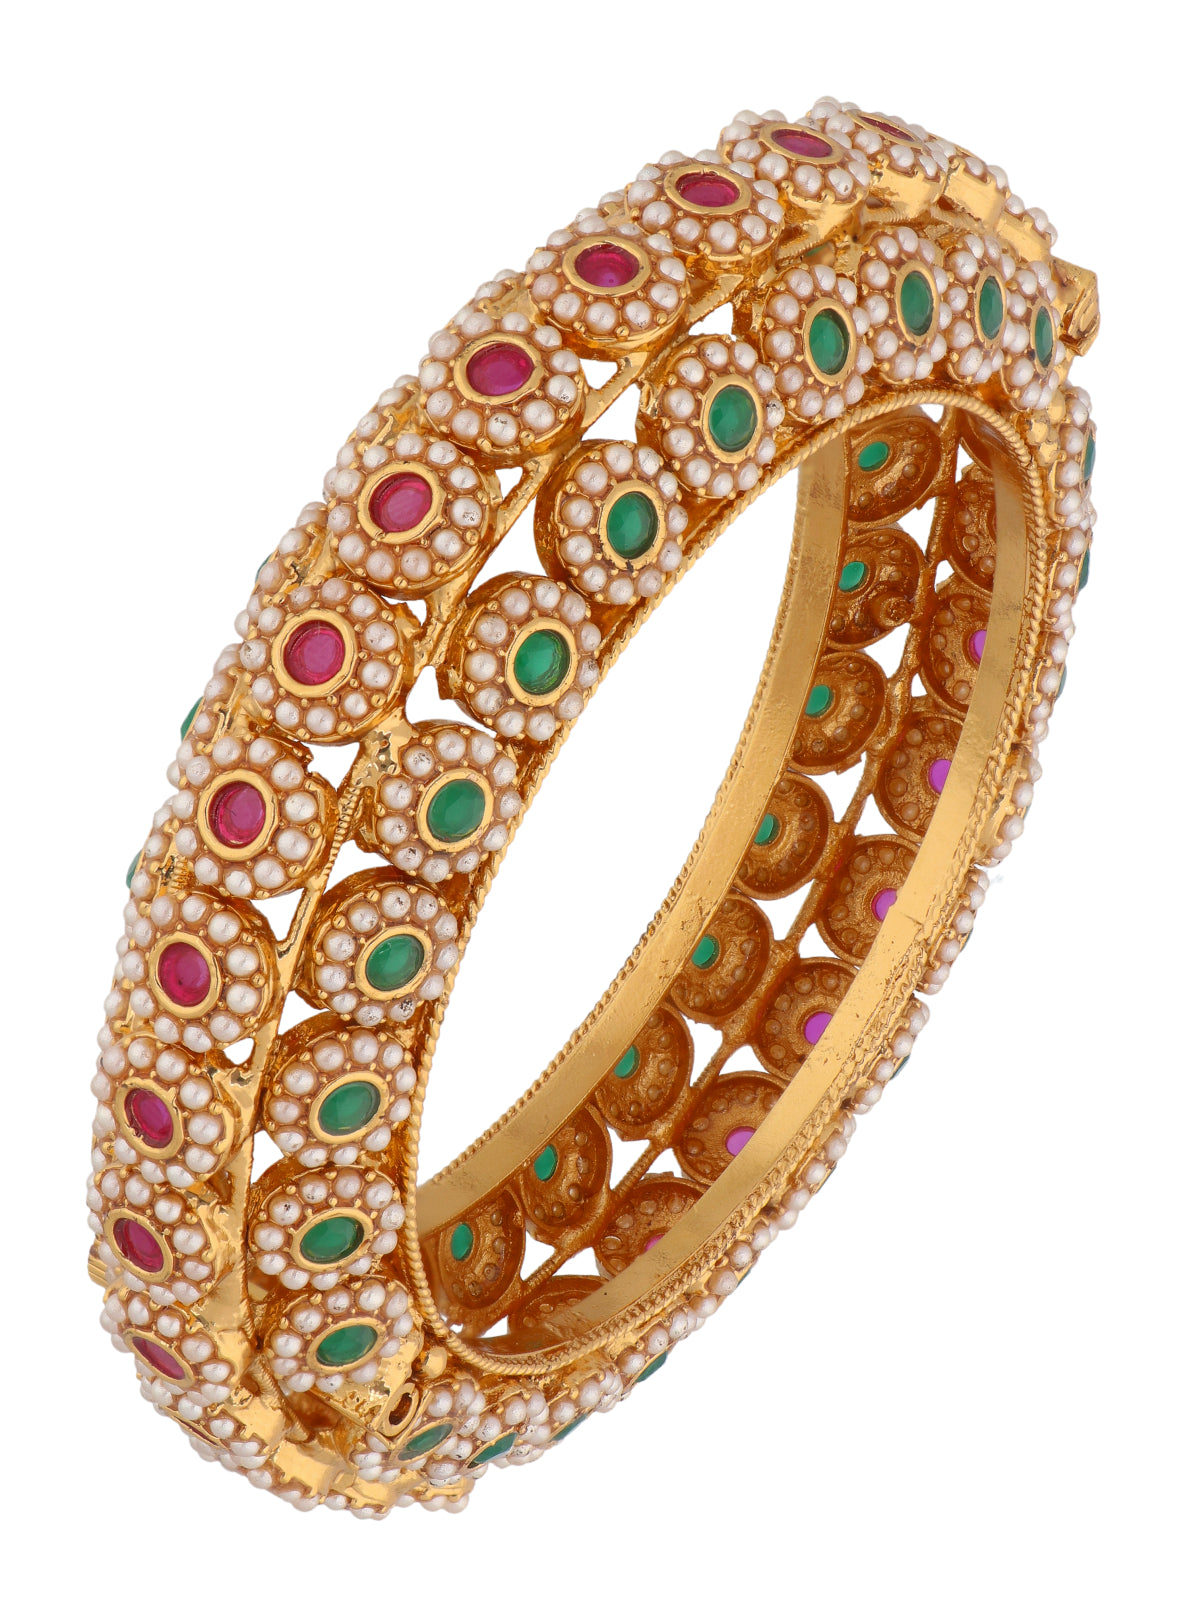 Raining Pearl Red and Green Temple Bangles 